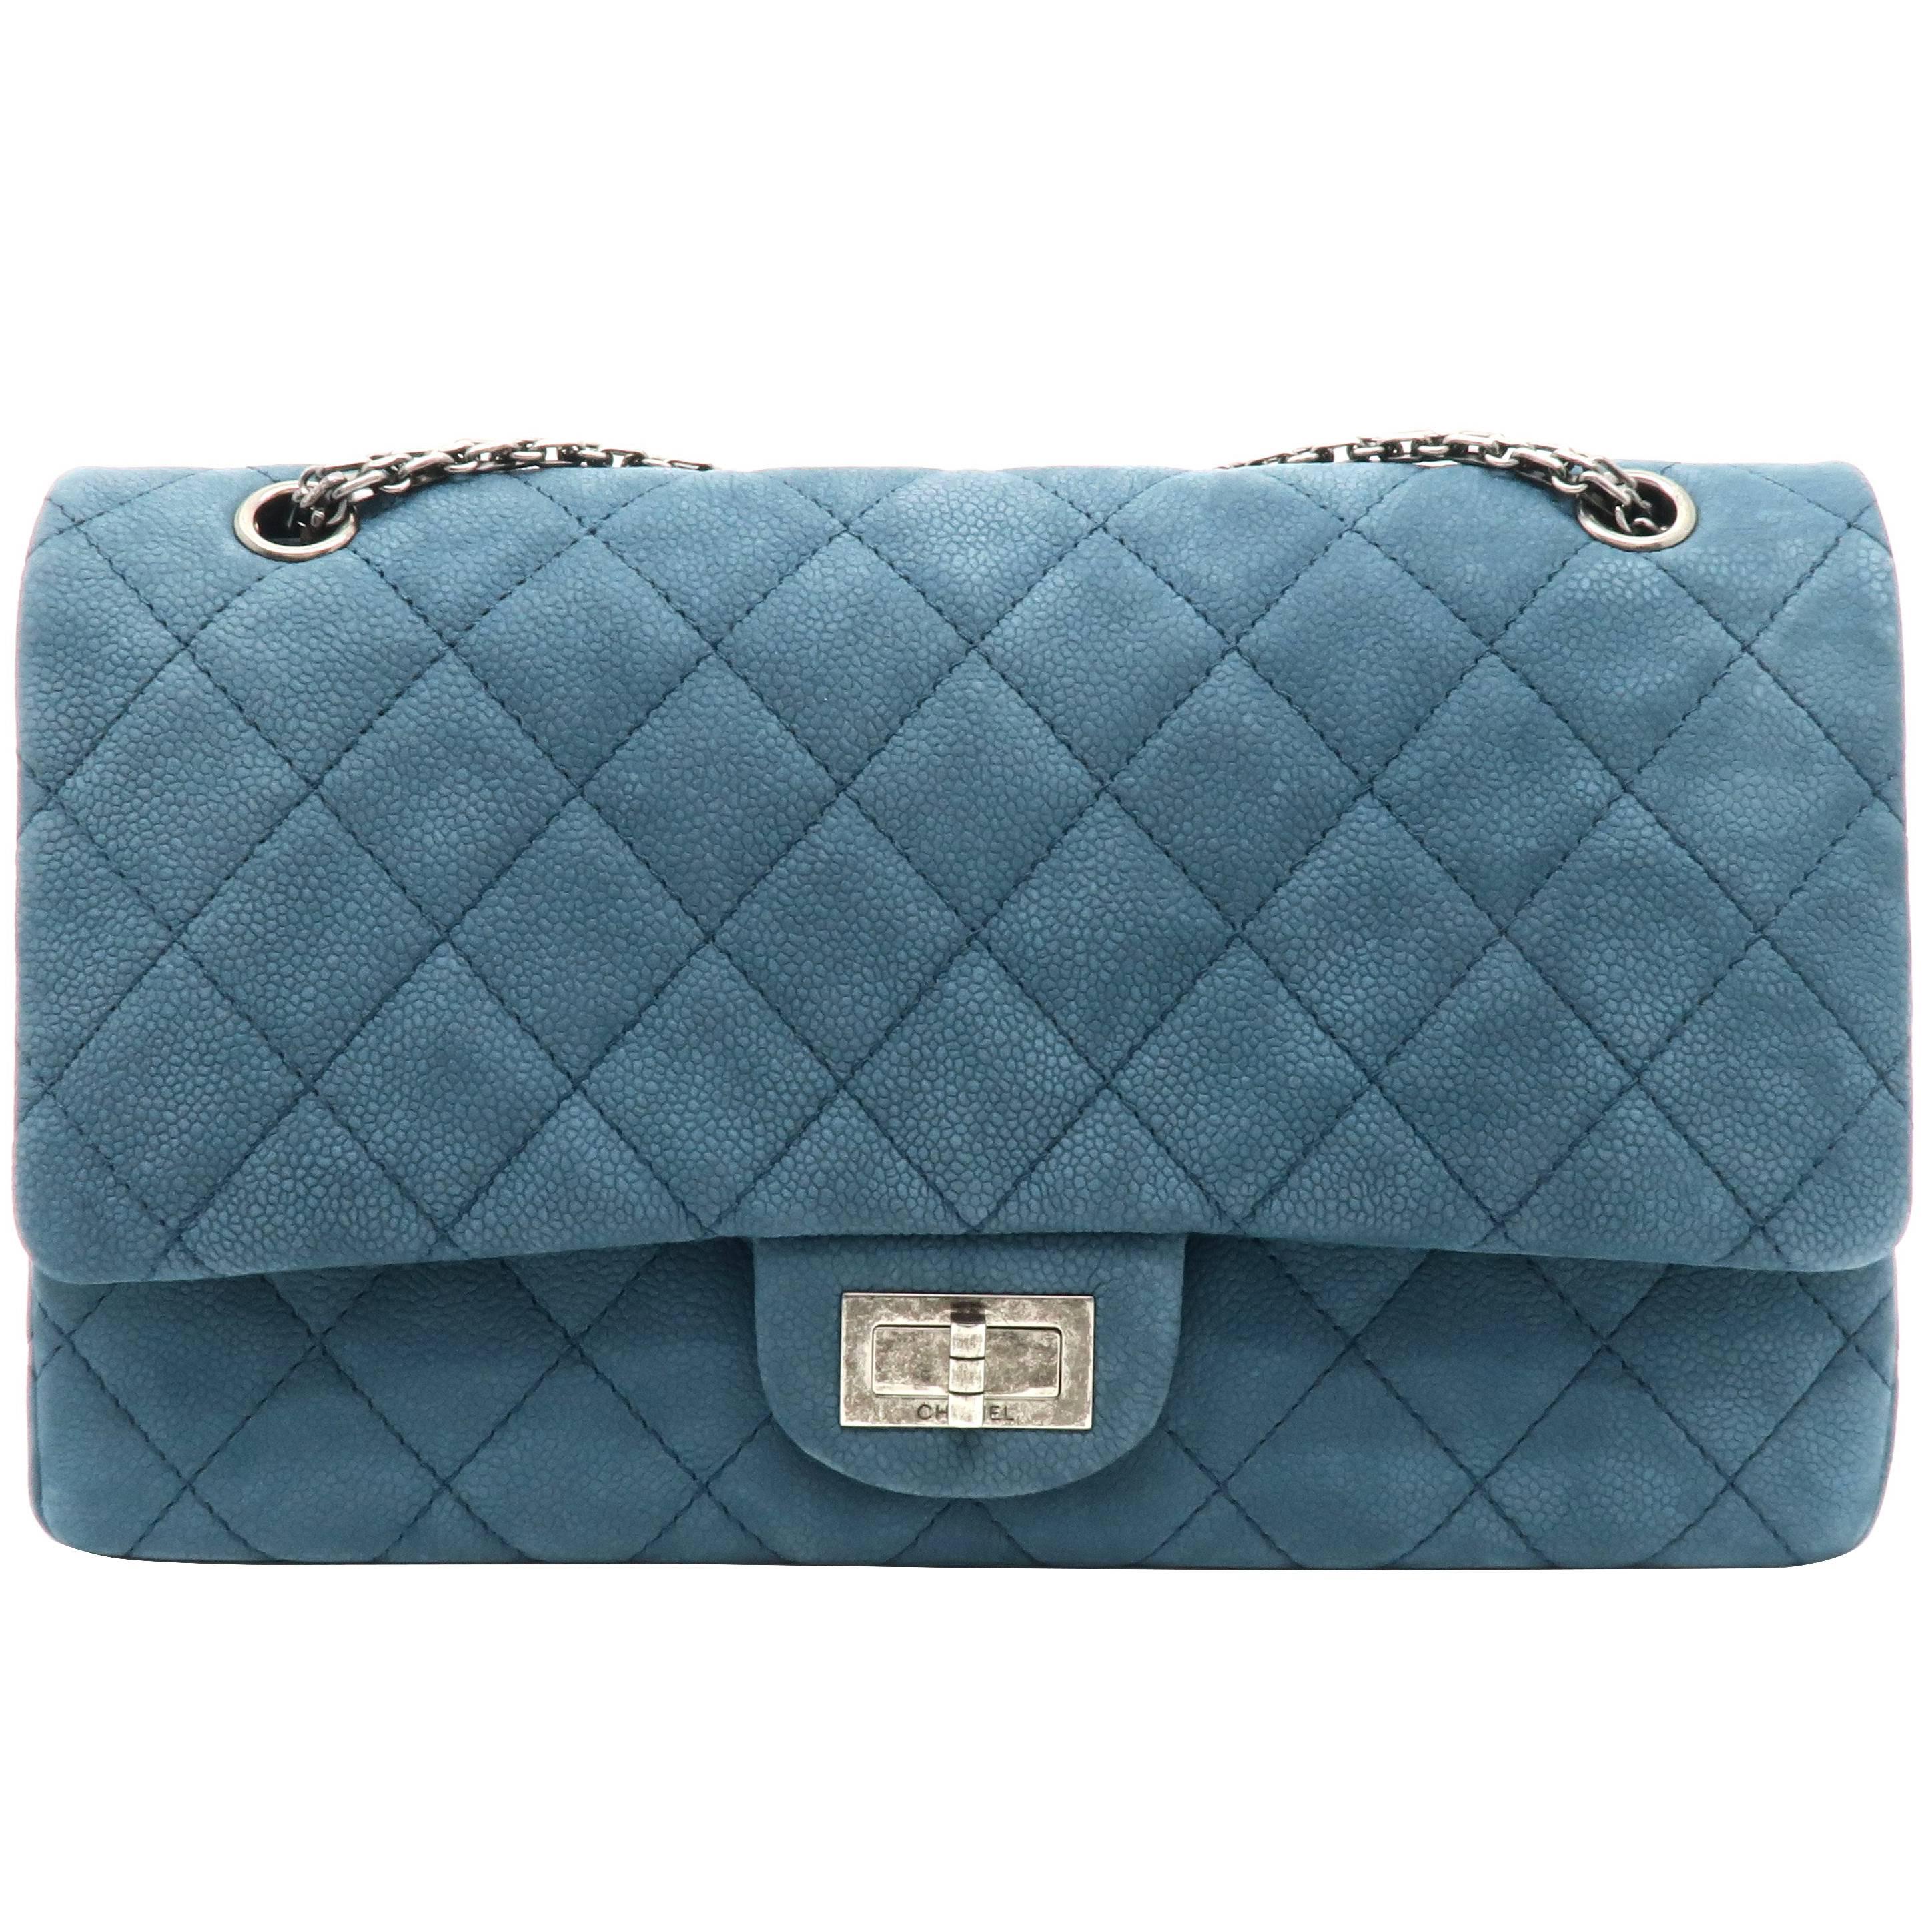 Chanel 2.55 Flap Blue Quilting Caviar Leather Silver Metal Shoulder Bag